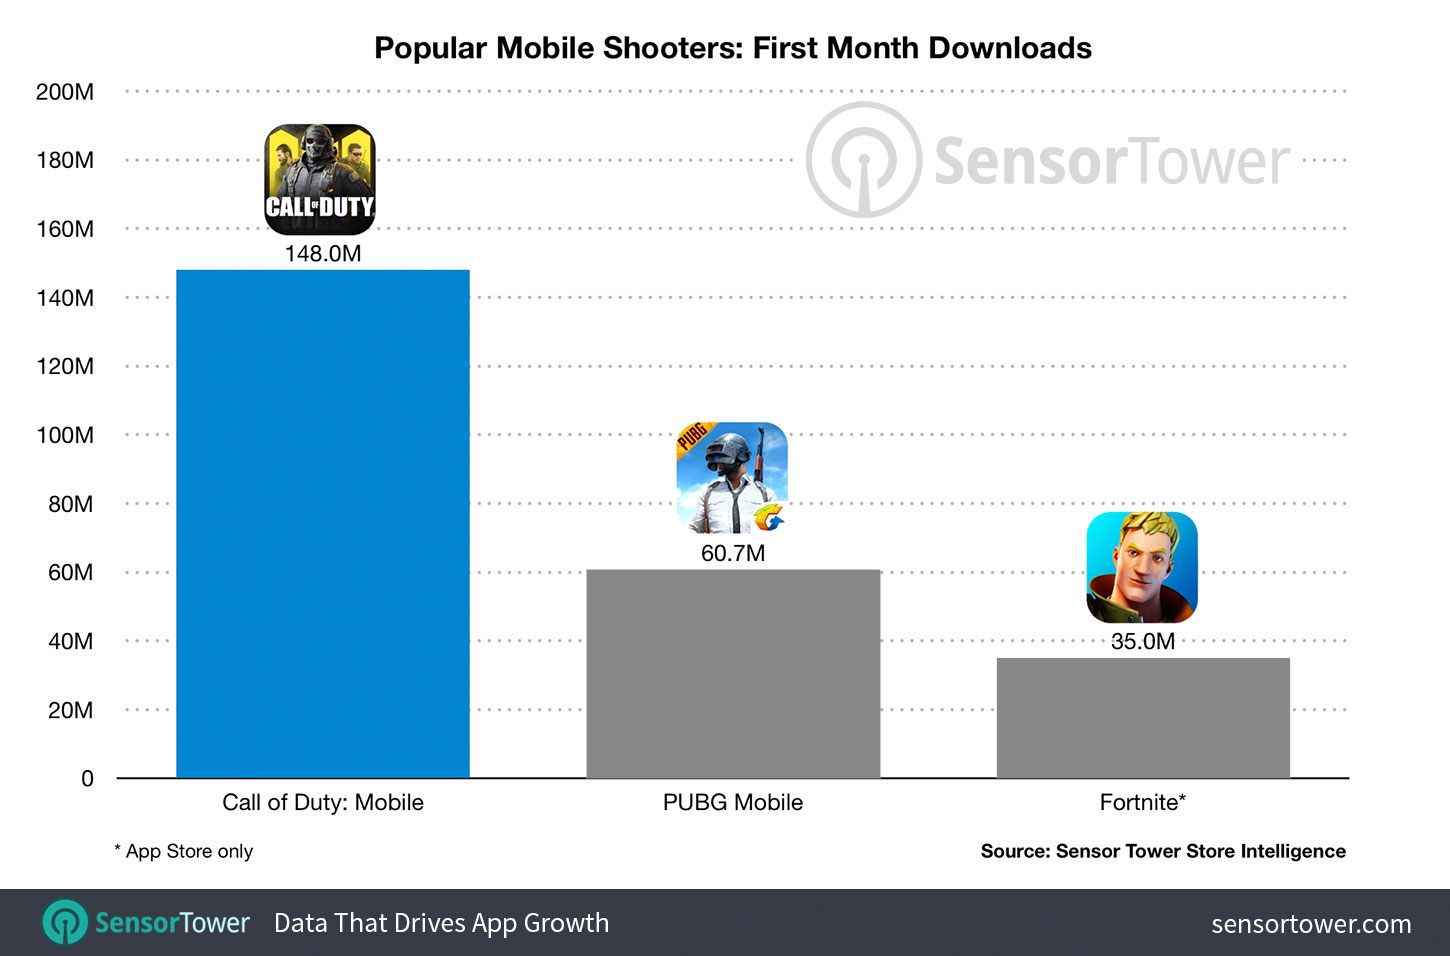 Report: Call of Duty Mobile surpasses $2 million in revenue in its first  two days [Sensor Tower]